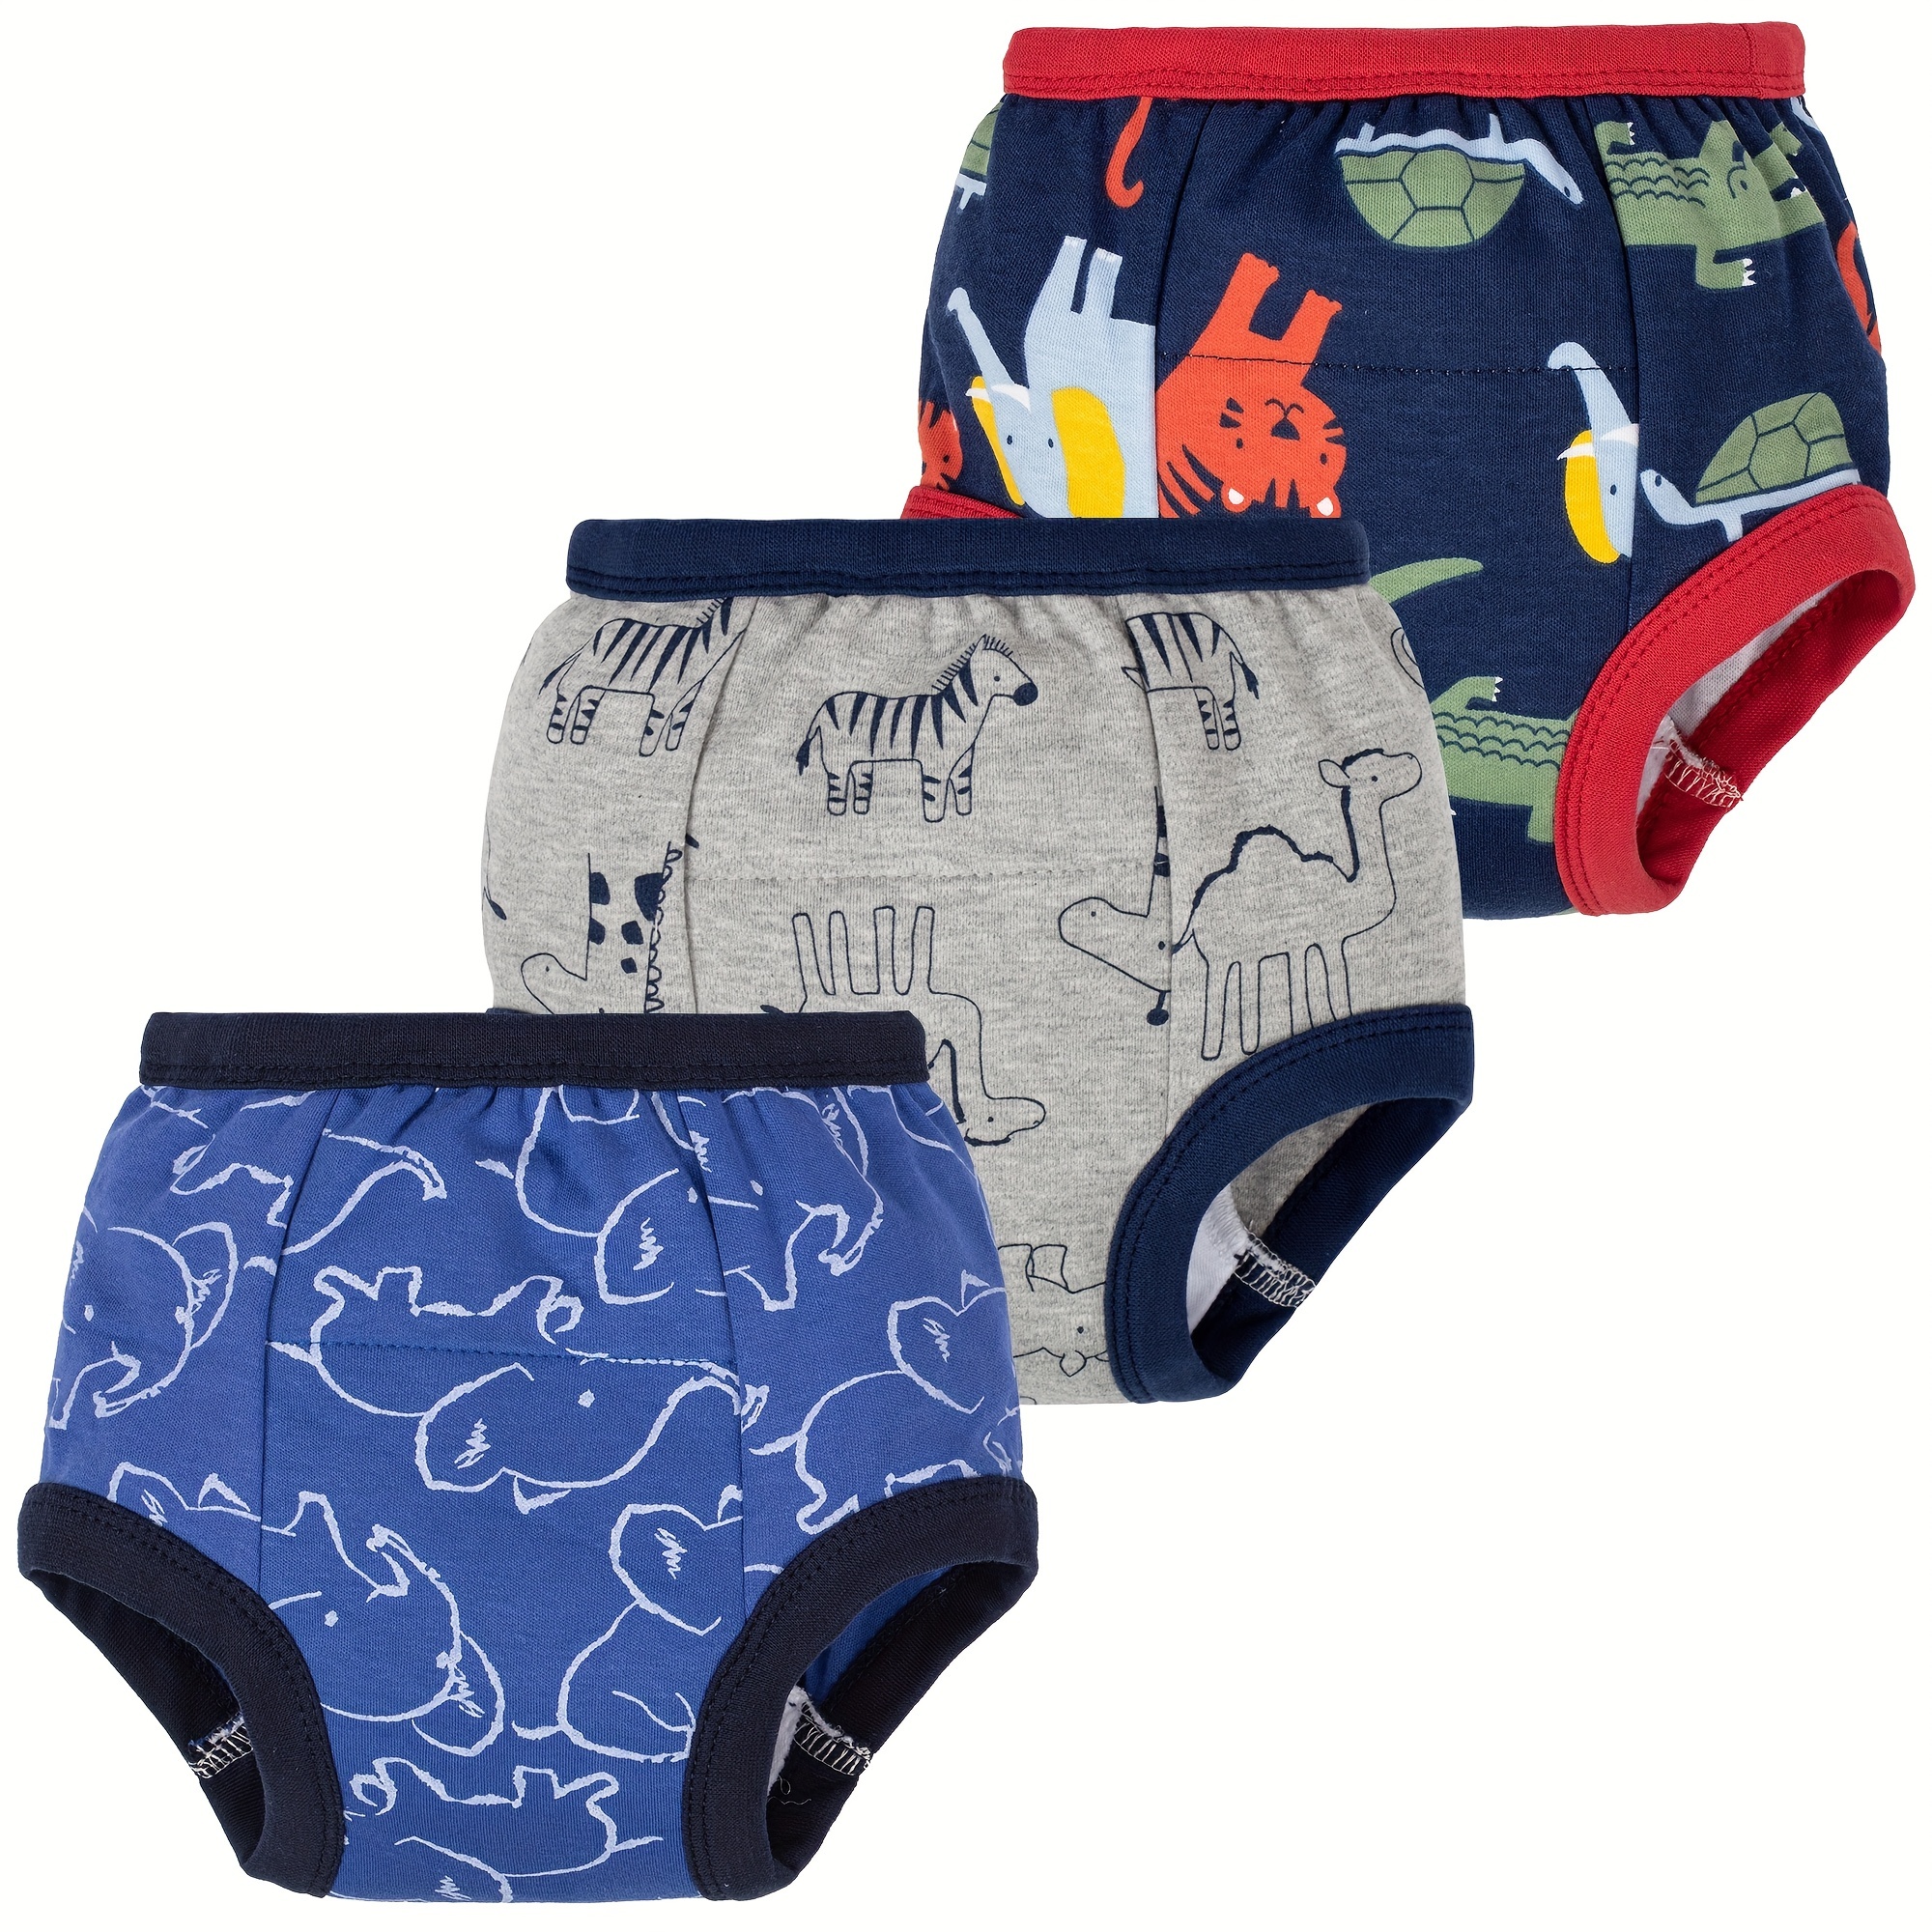 Washable Baby Training Pants Kids Shorts Underwear Breathable Cloth Diaper  Reusable Ecological Nappy Learning Pants